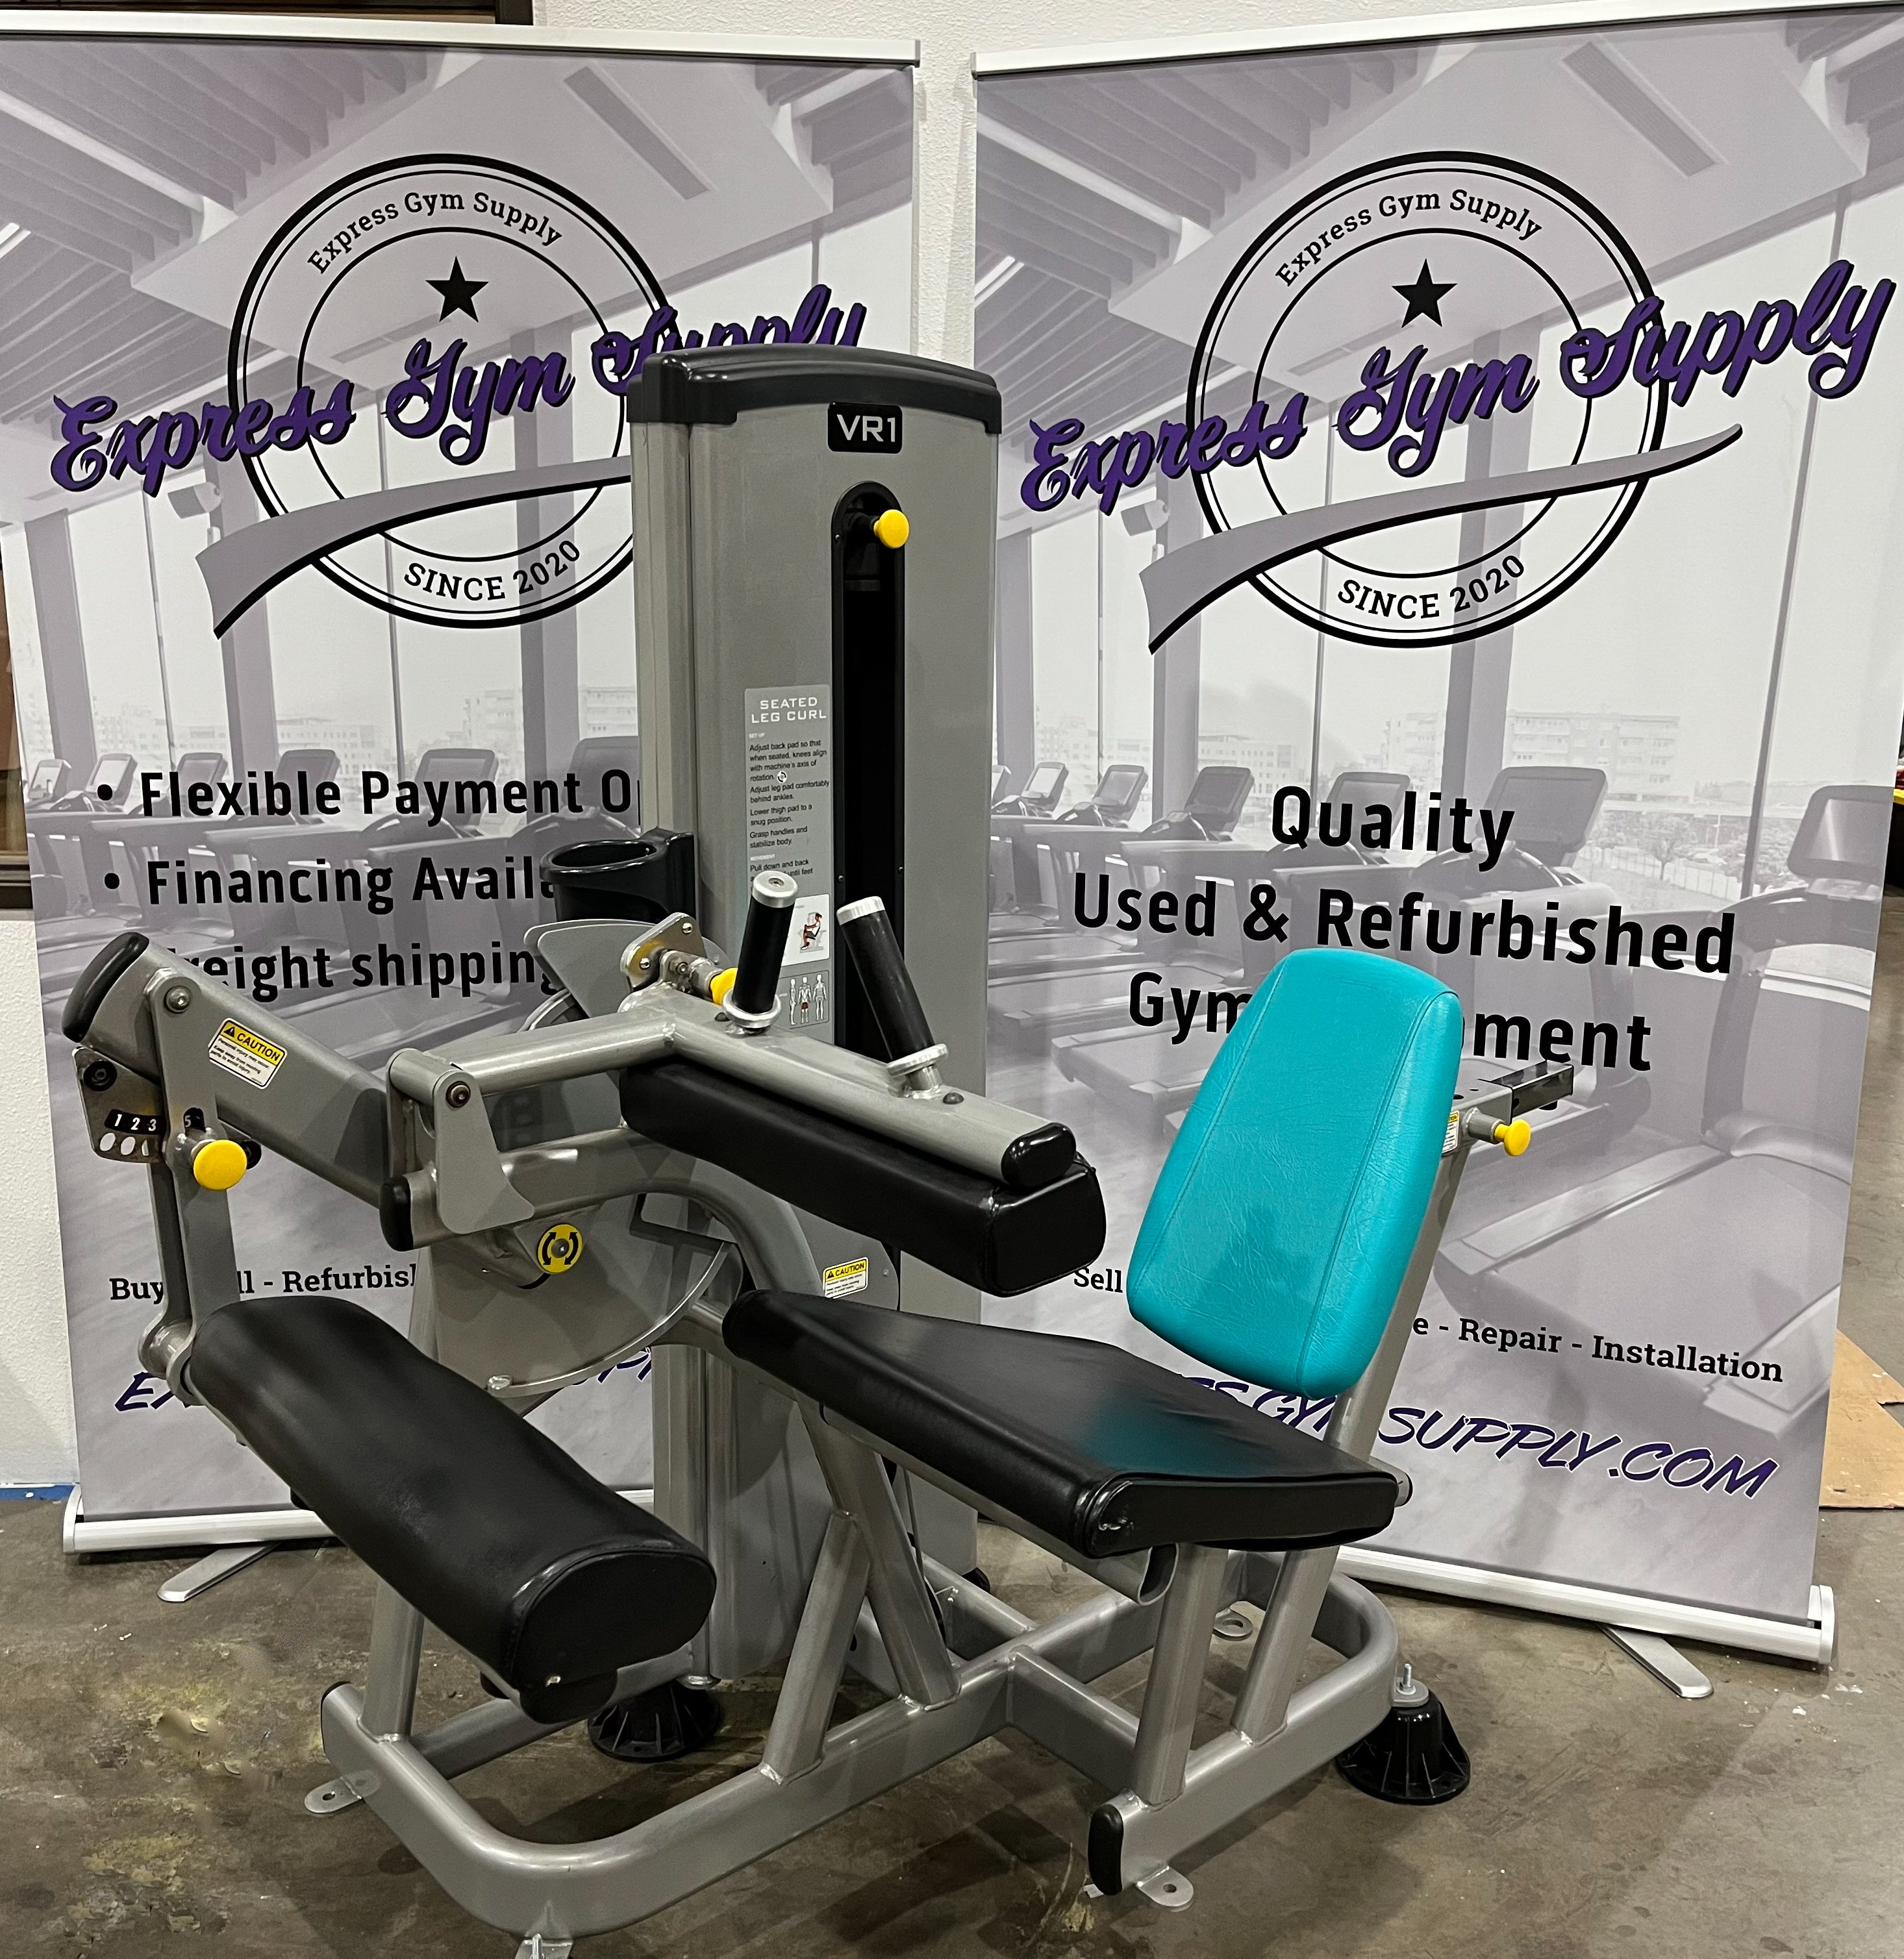 Used Cybex VR1 Seated Leg Curl